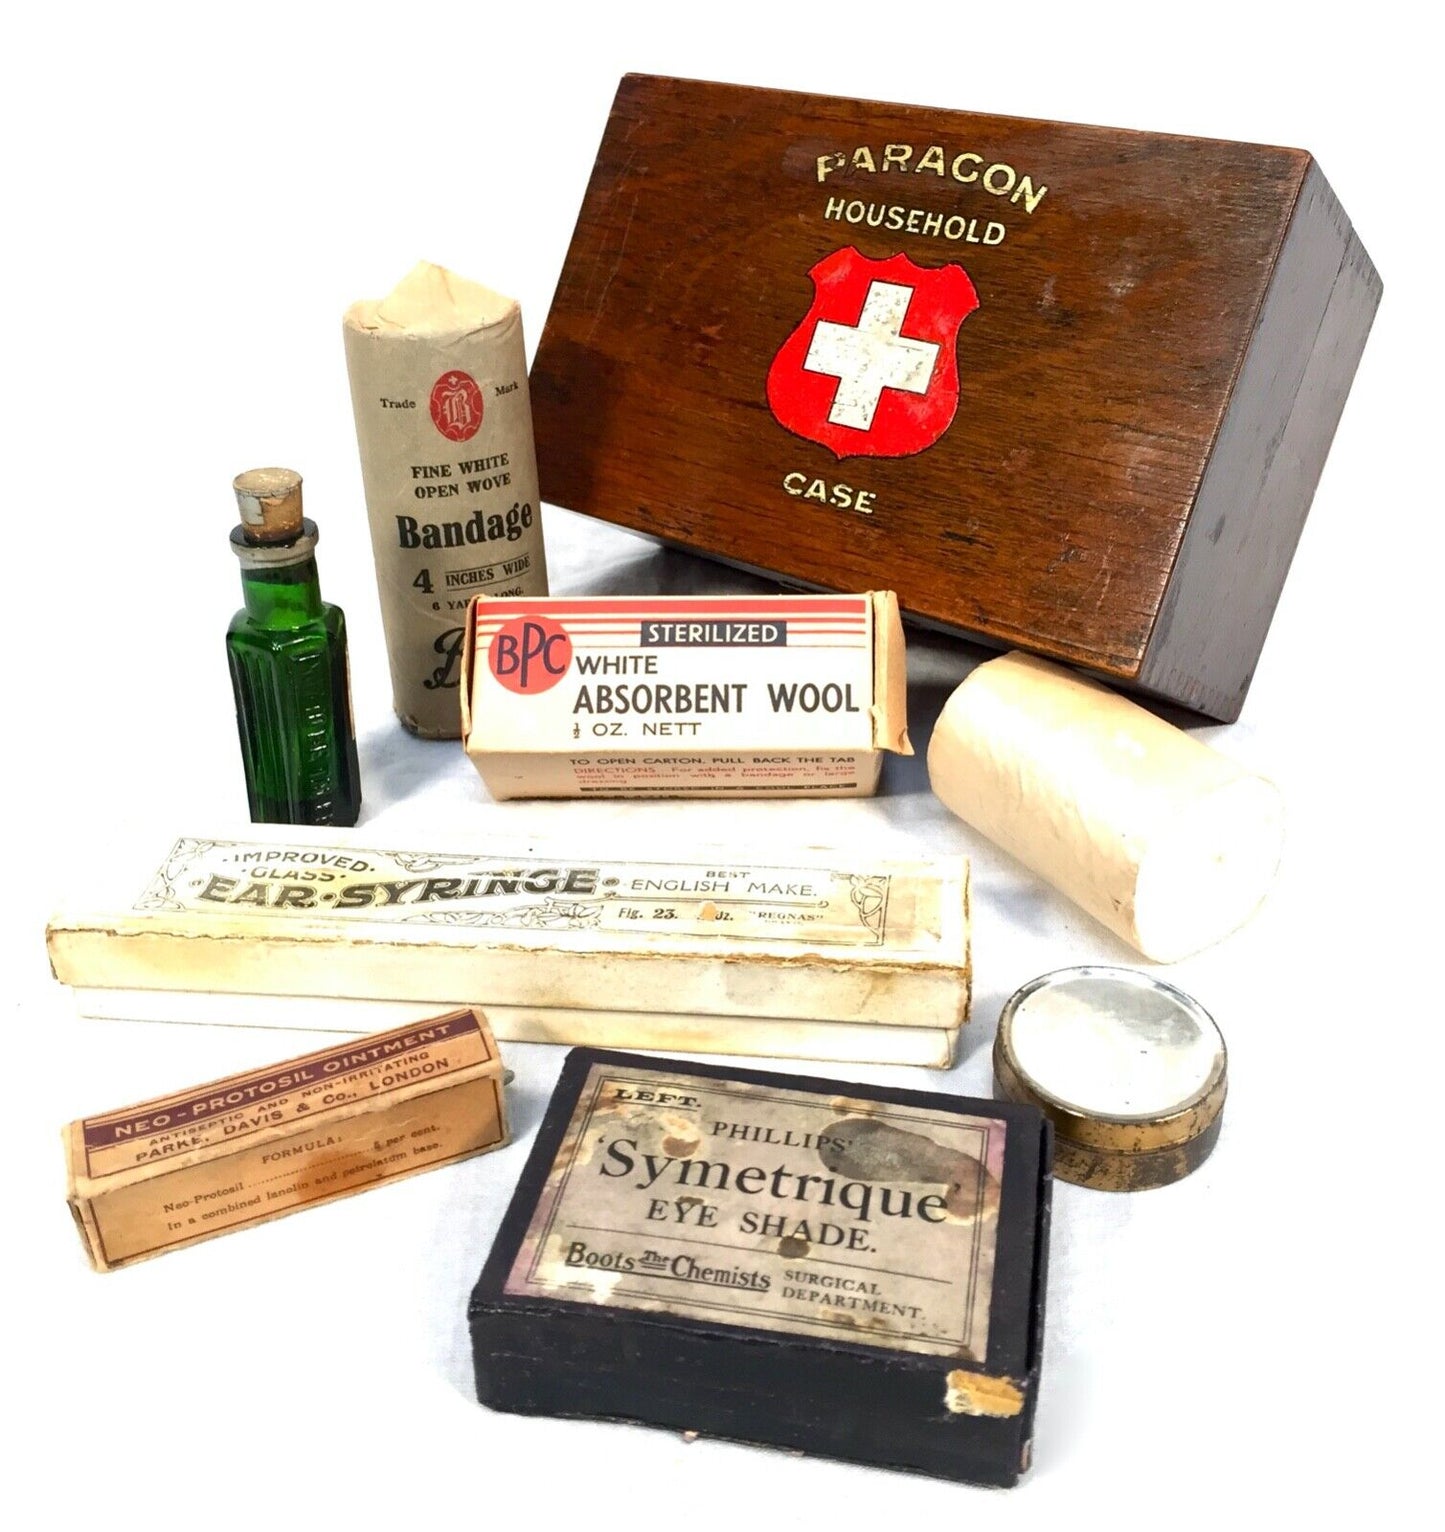 Antique Wooden Paragon Household Ambulance First Aid Box & Contents Apothecary